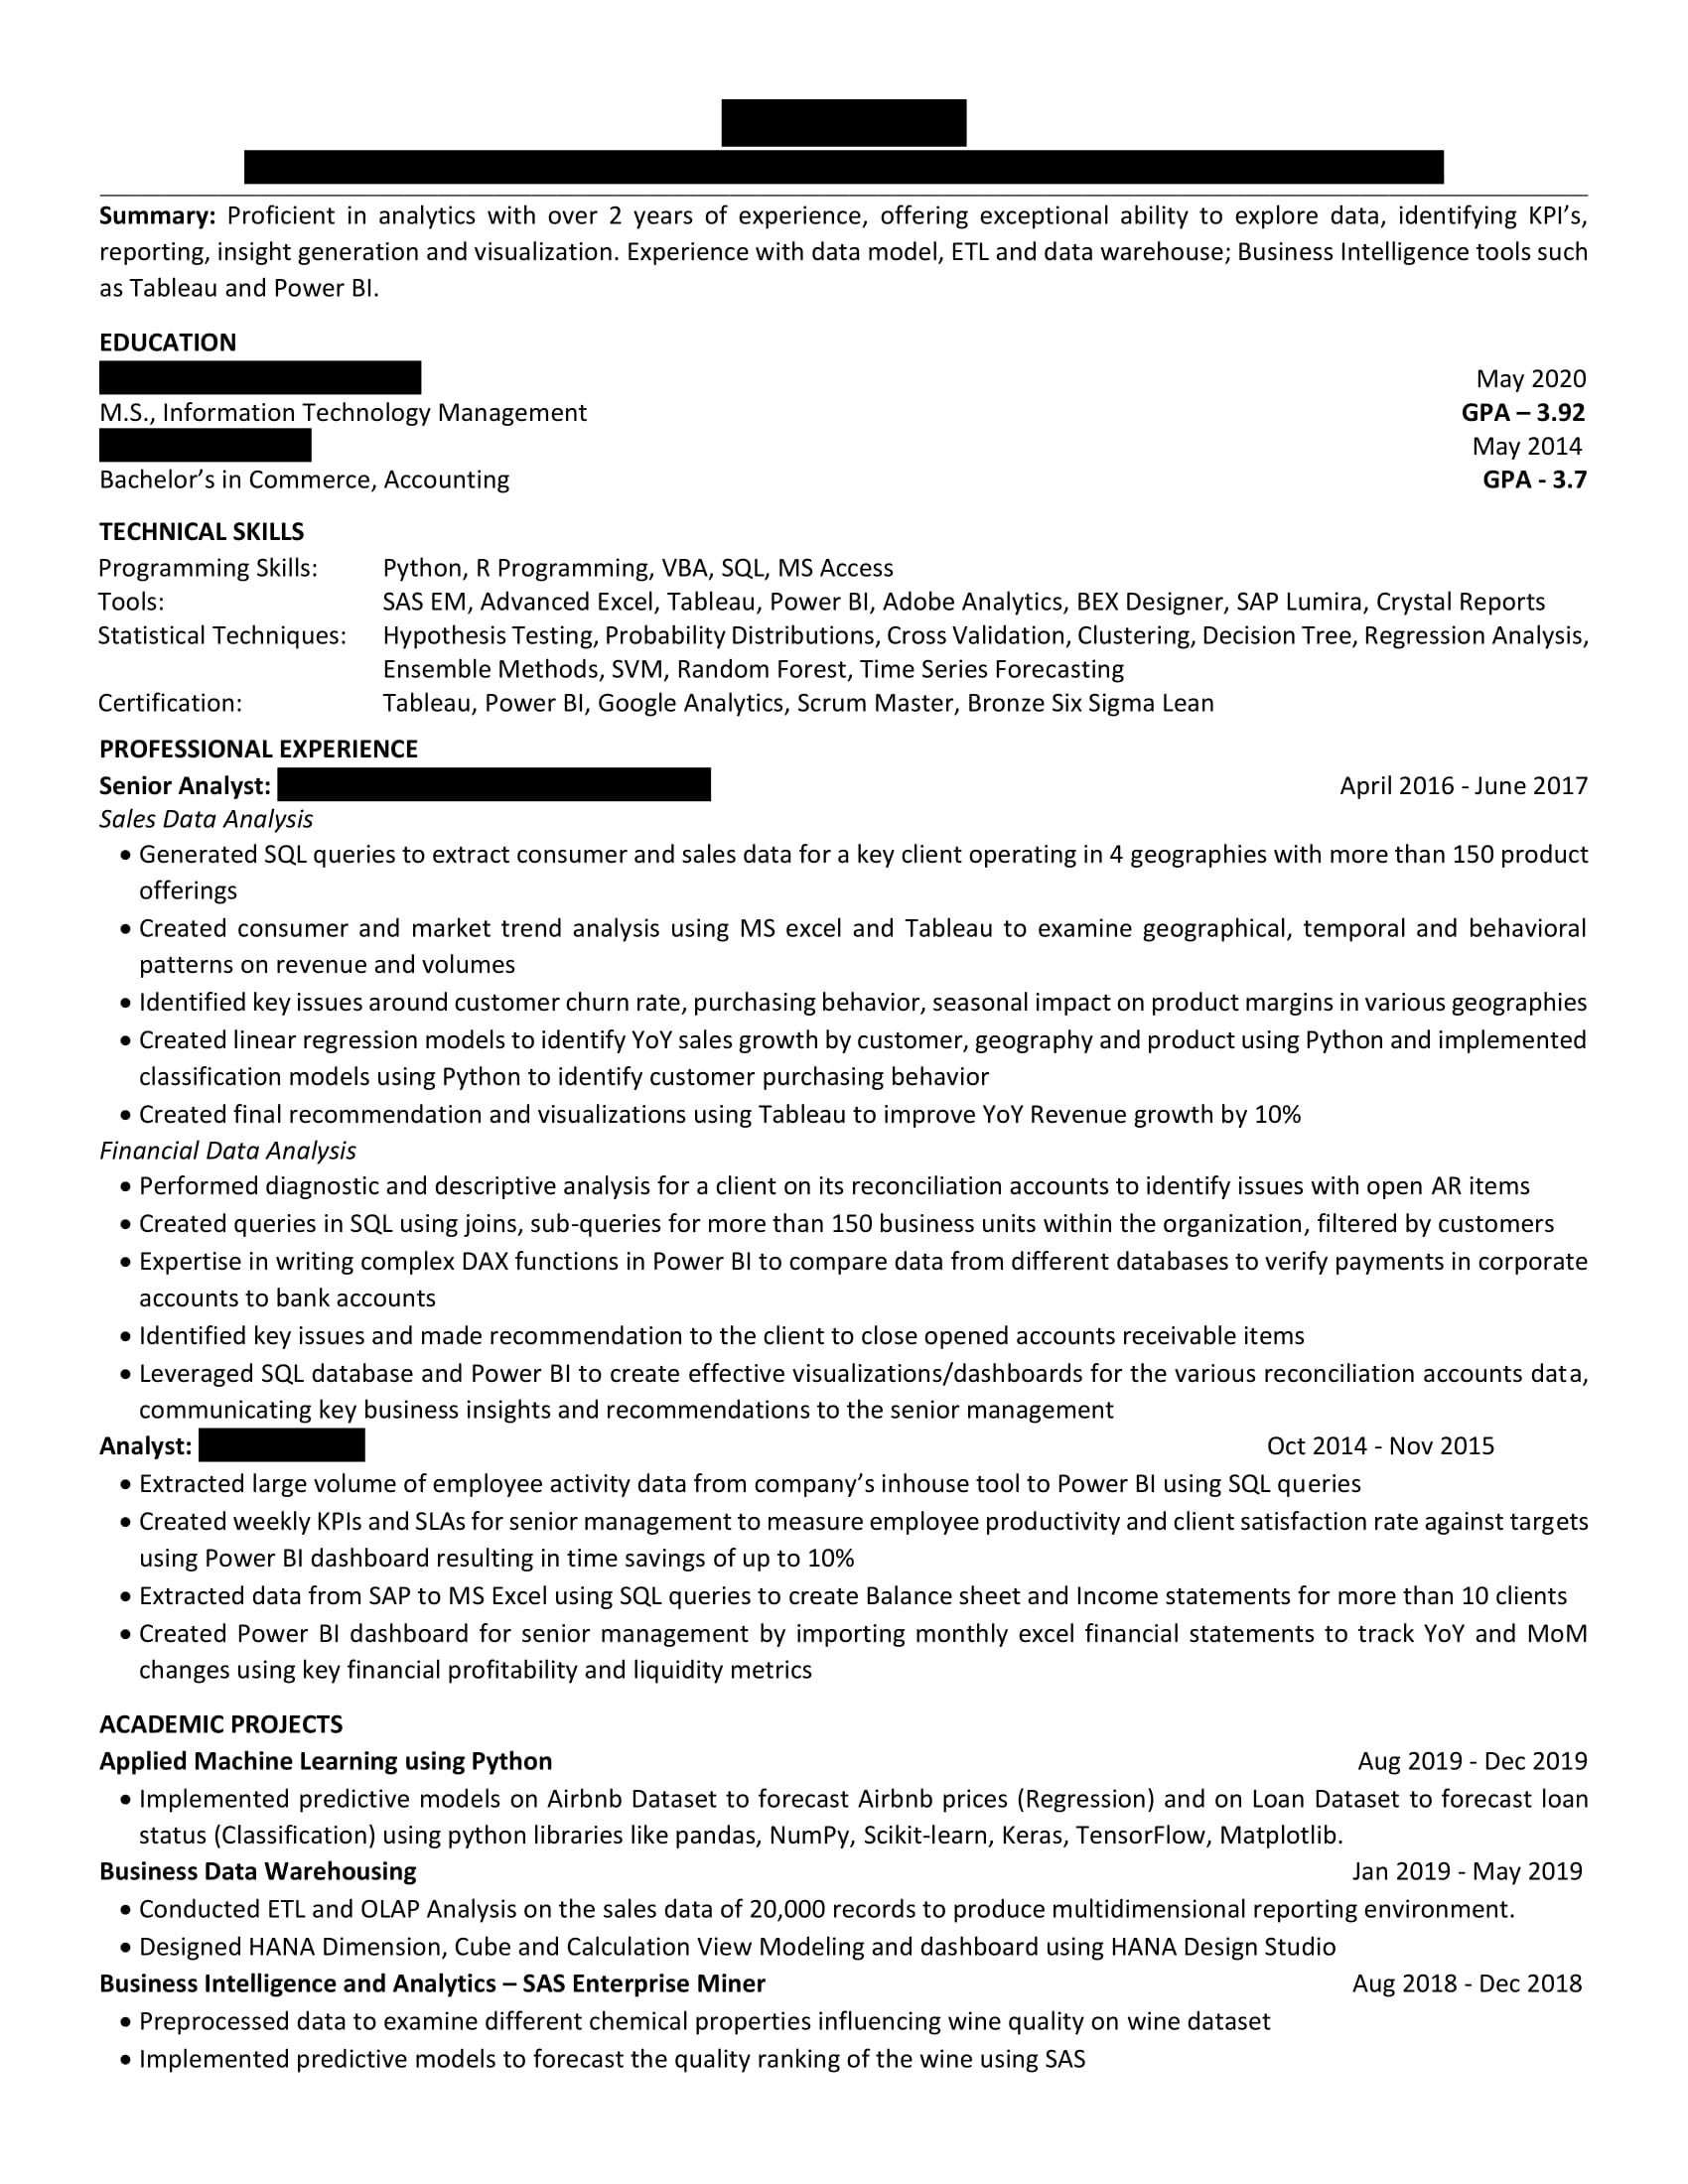 Sample Resume for Data Analyst with No Experience Entry Level Data Analyst Resume : R/resumes